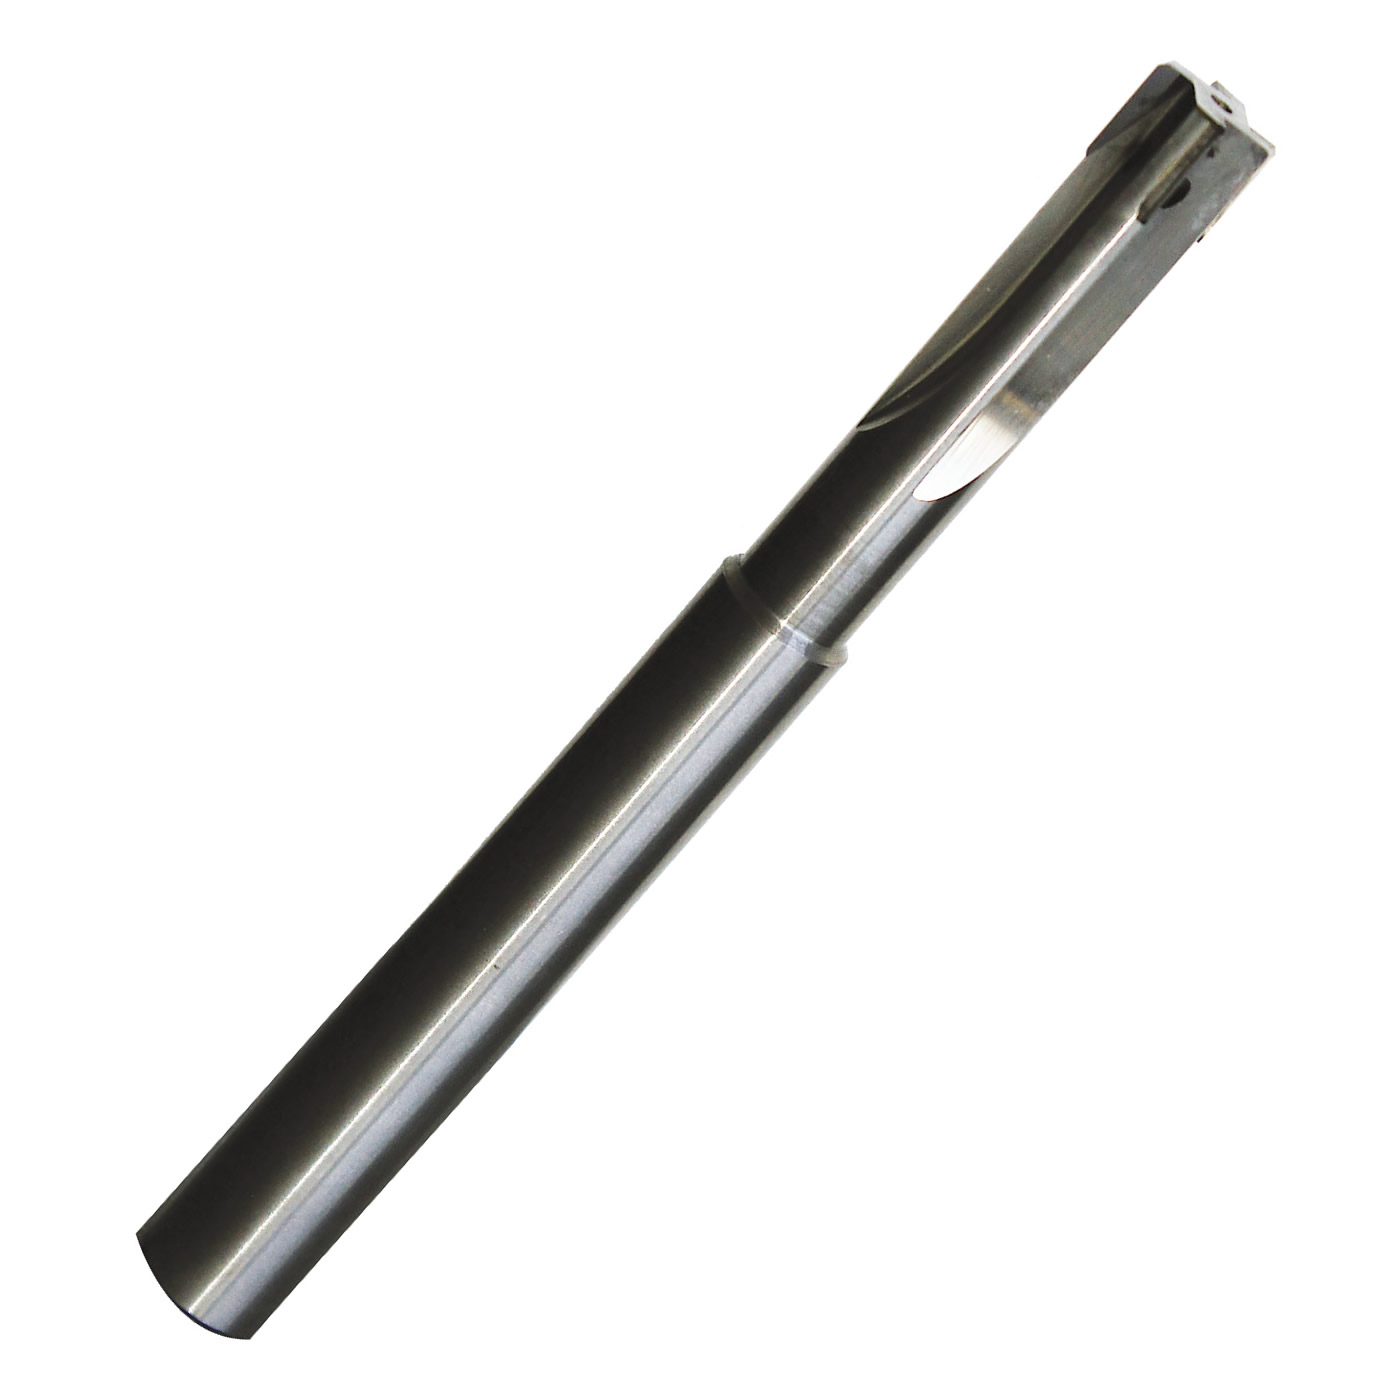 A 4-flute, through-coolant reamer is suitable for automotive applications.